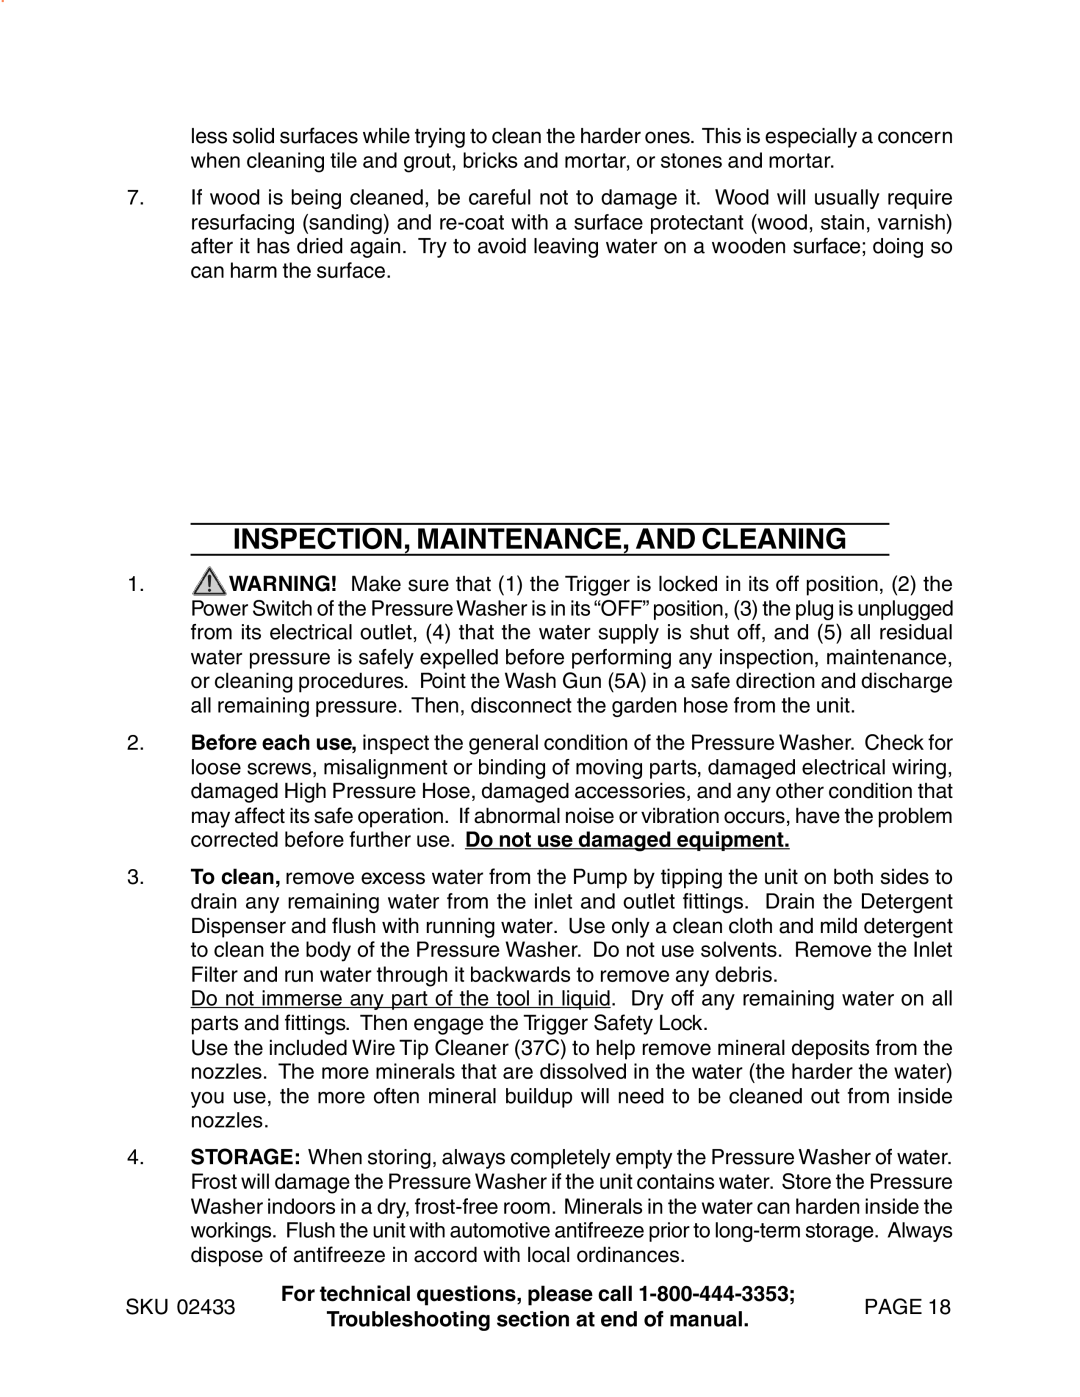 Harbor Freight Tools 2433 manual Inspection, Maintenance, And Cleaning 